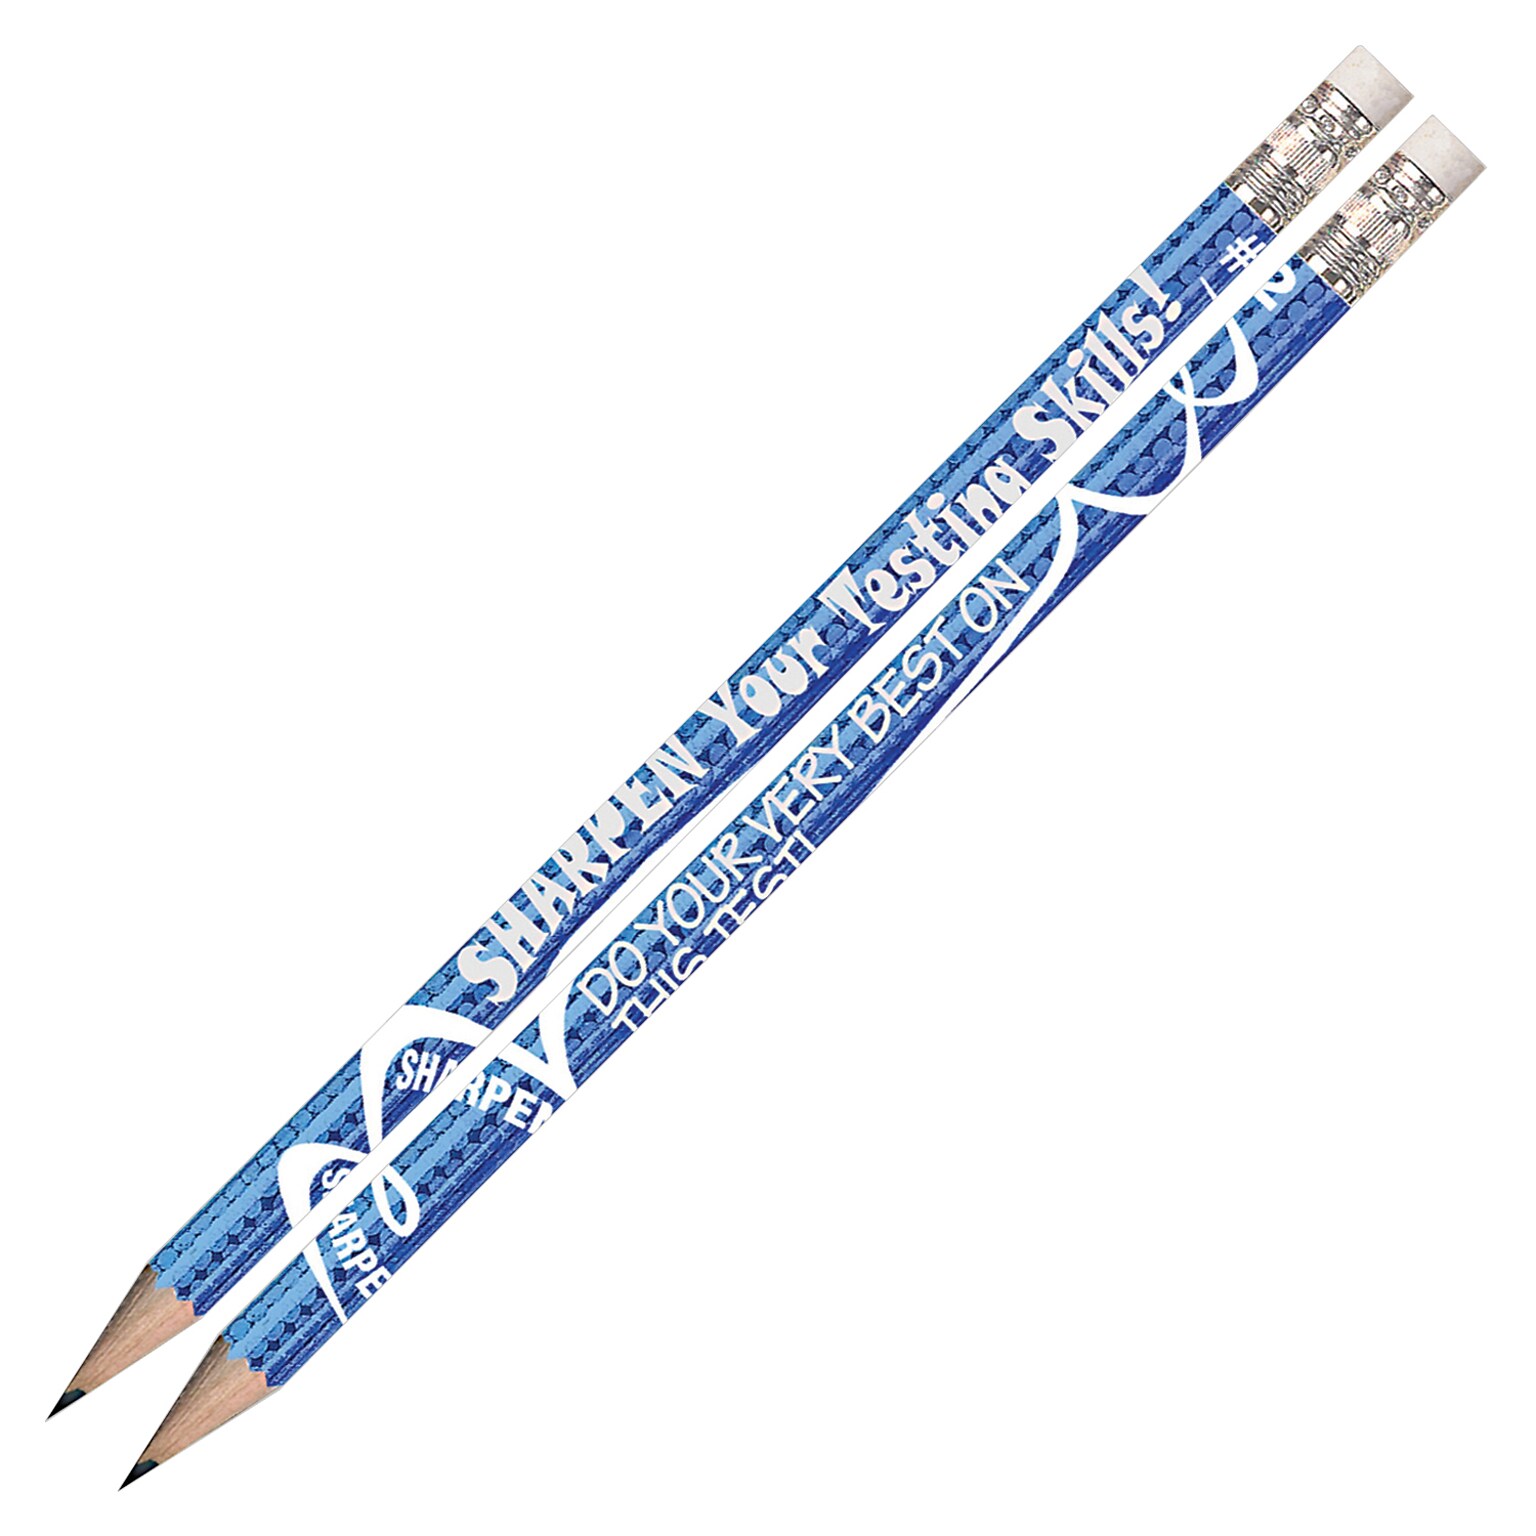 Musgrave Pencil Company Sharpen Your Testing Skills Motivational Pencils, #2 Lead, 12 Per Pack, 12 Packs (MUS2458D-12)